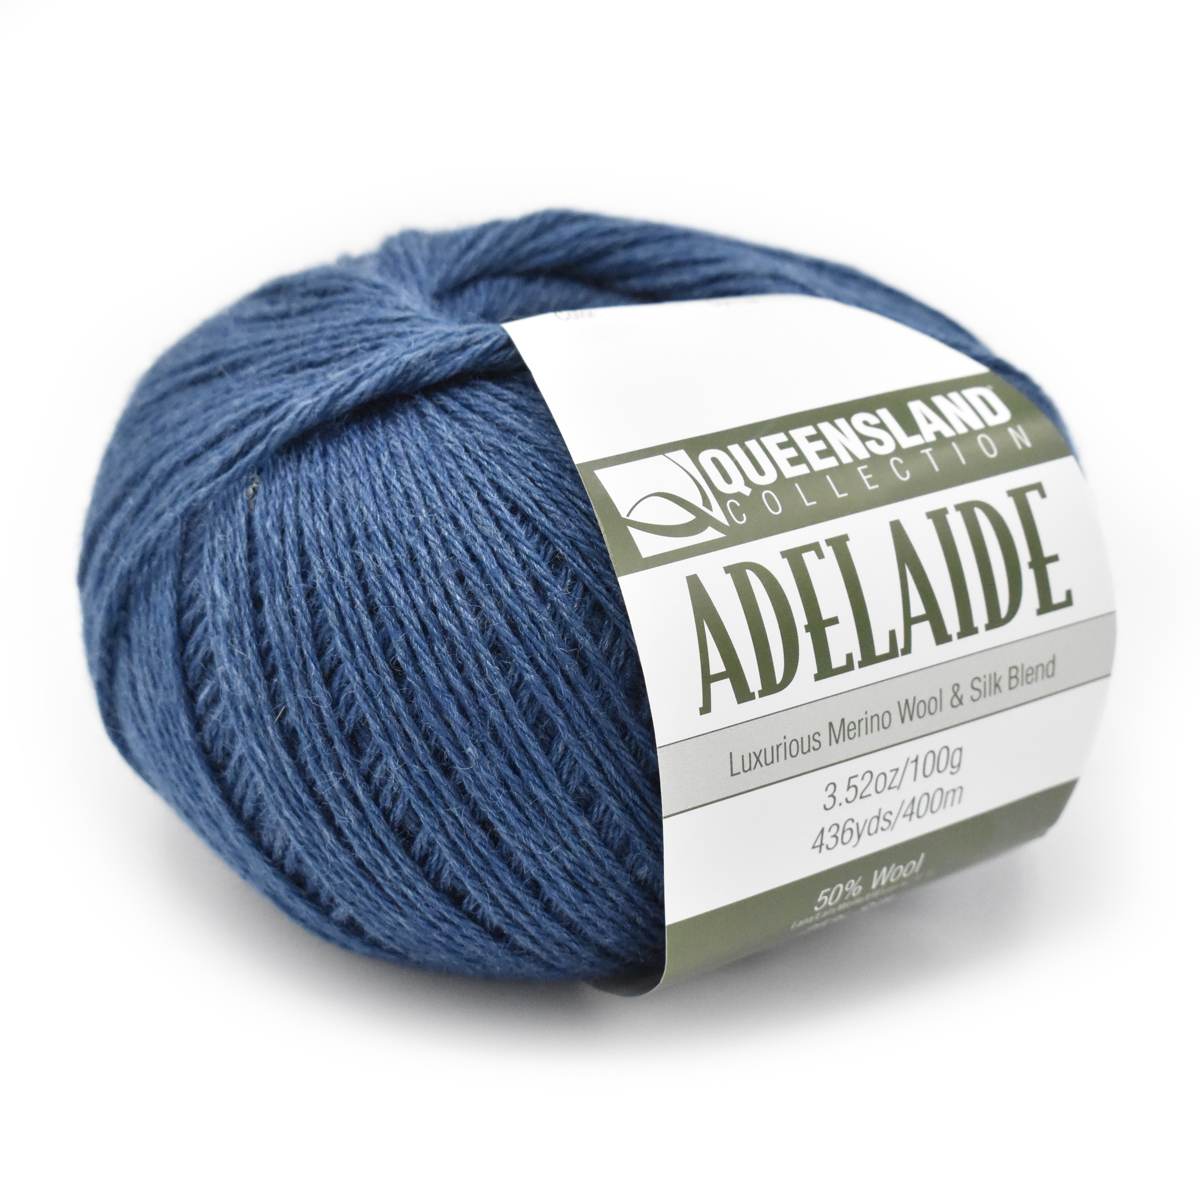 a skein of Adelaide